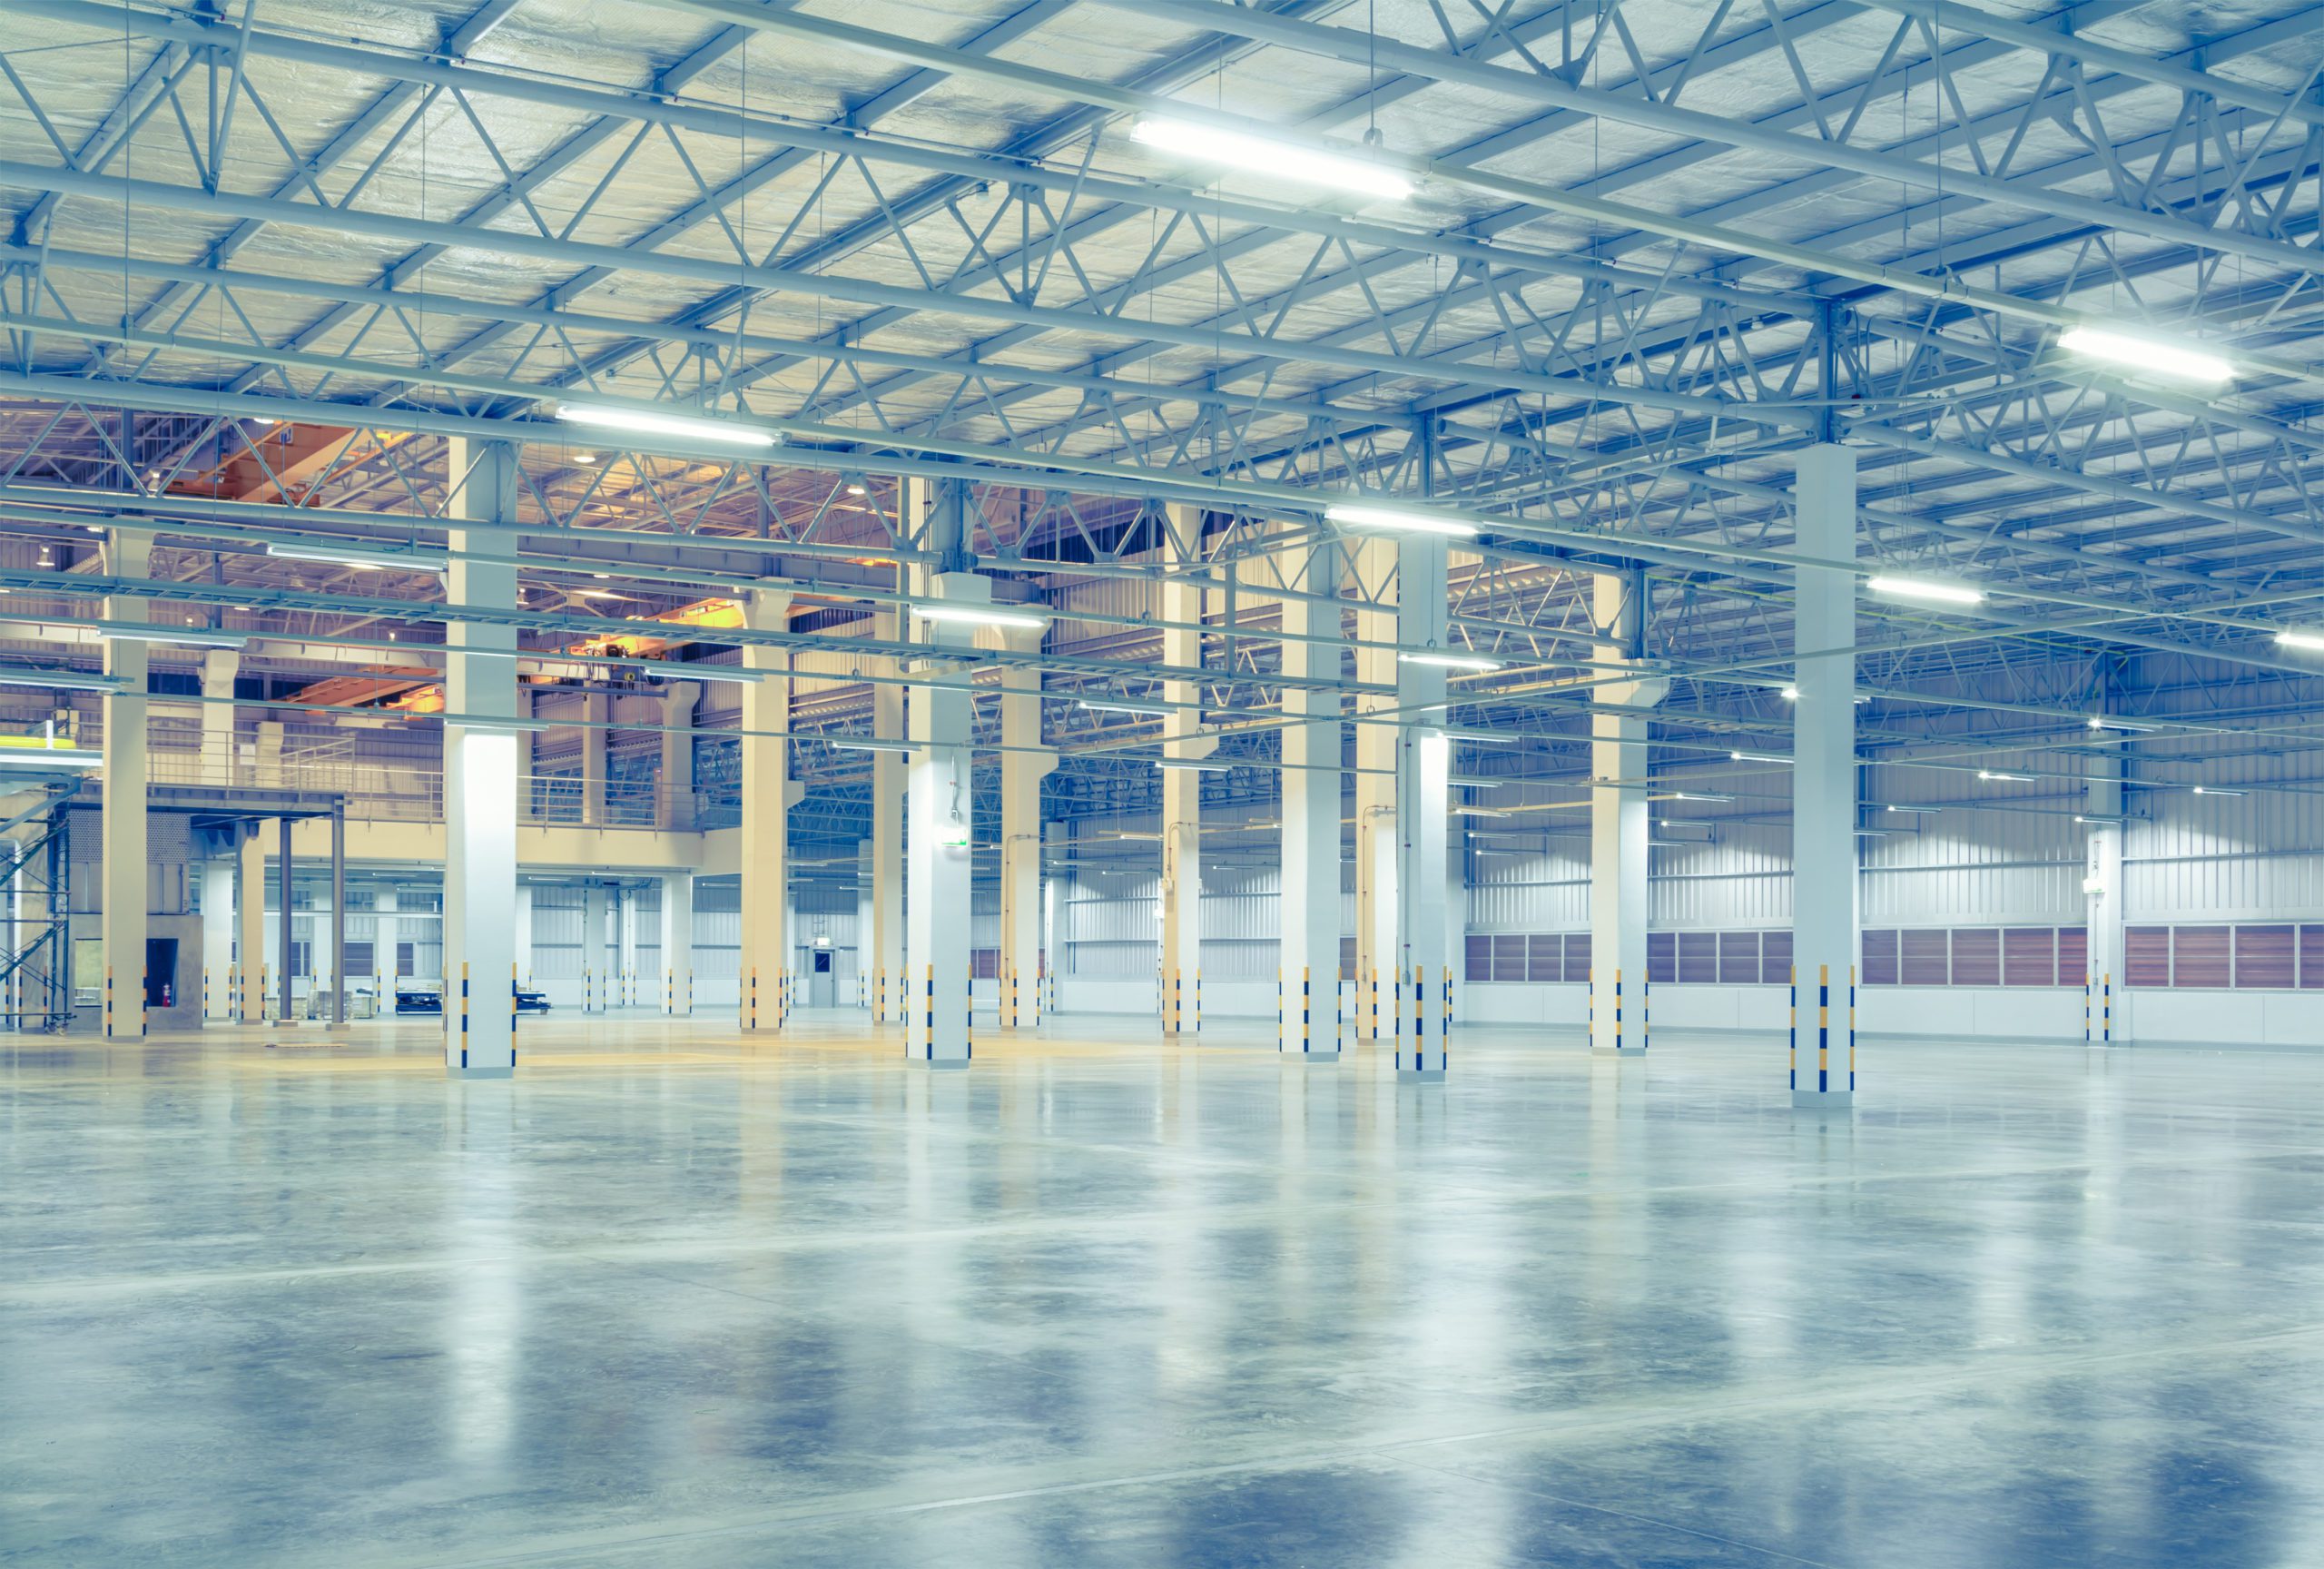 Multilevel industrial facilities offer challenges with opportunity